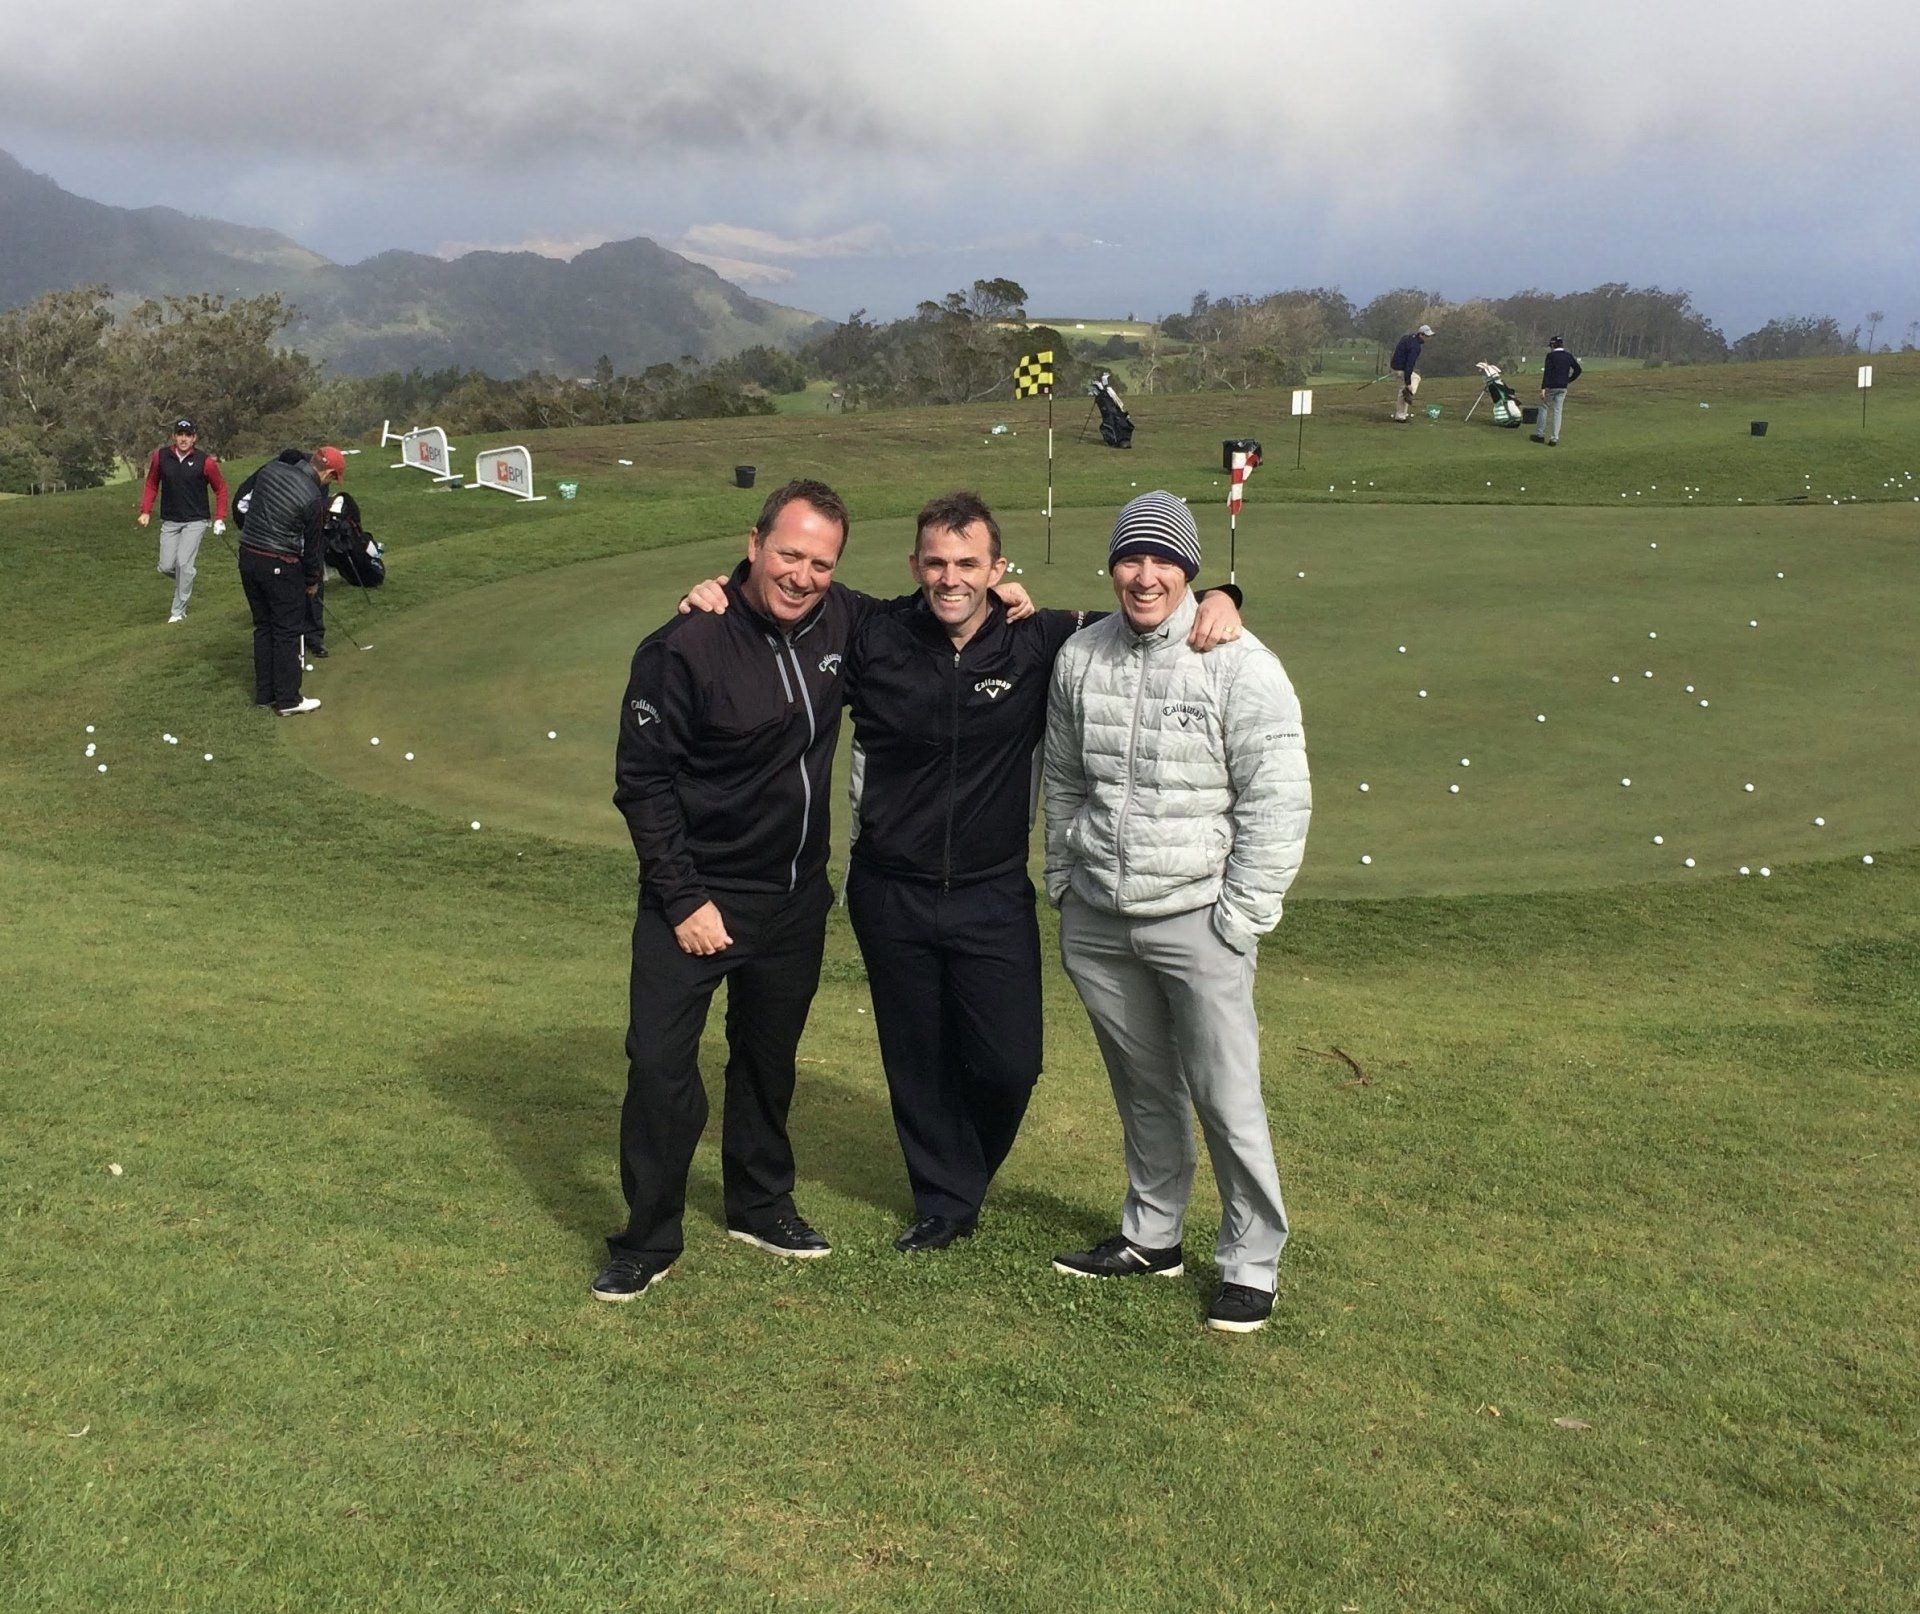 Working on the European Tour with great colleagues Garby (left) and Seamus in Madeira.